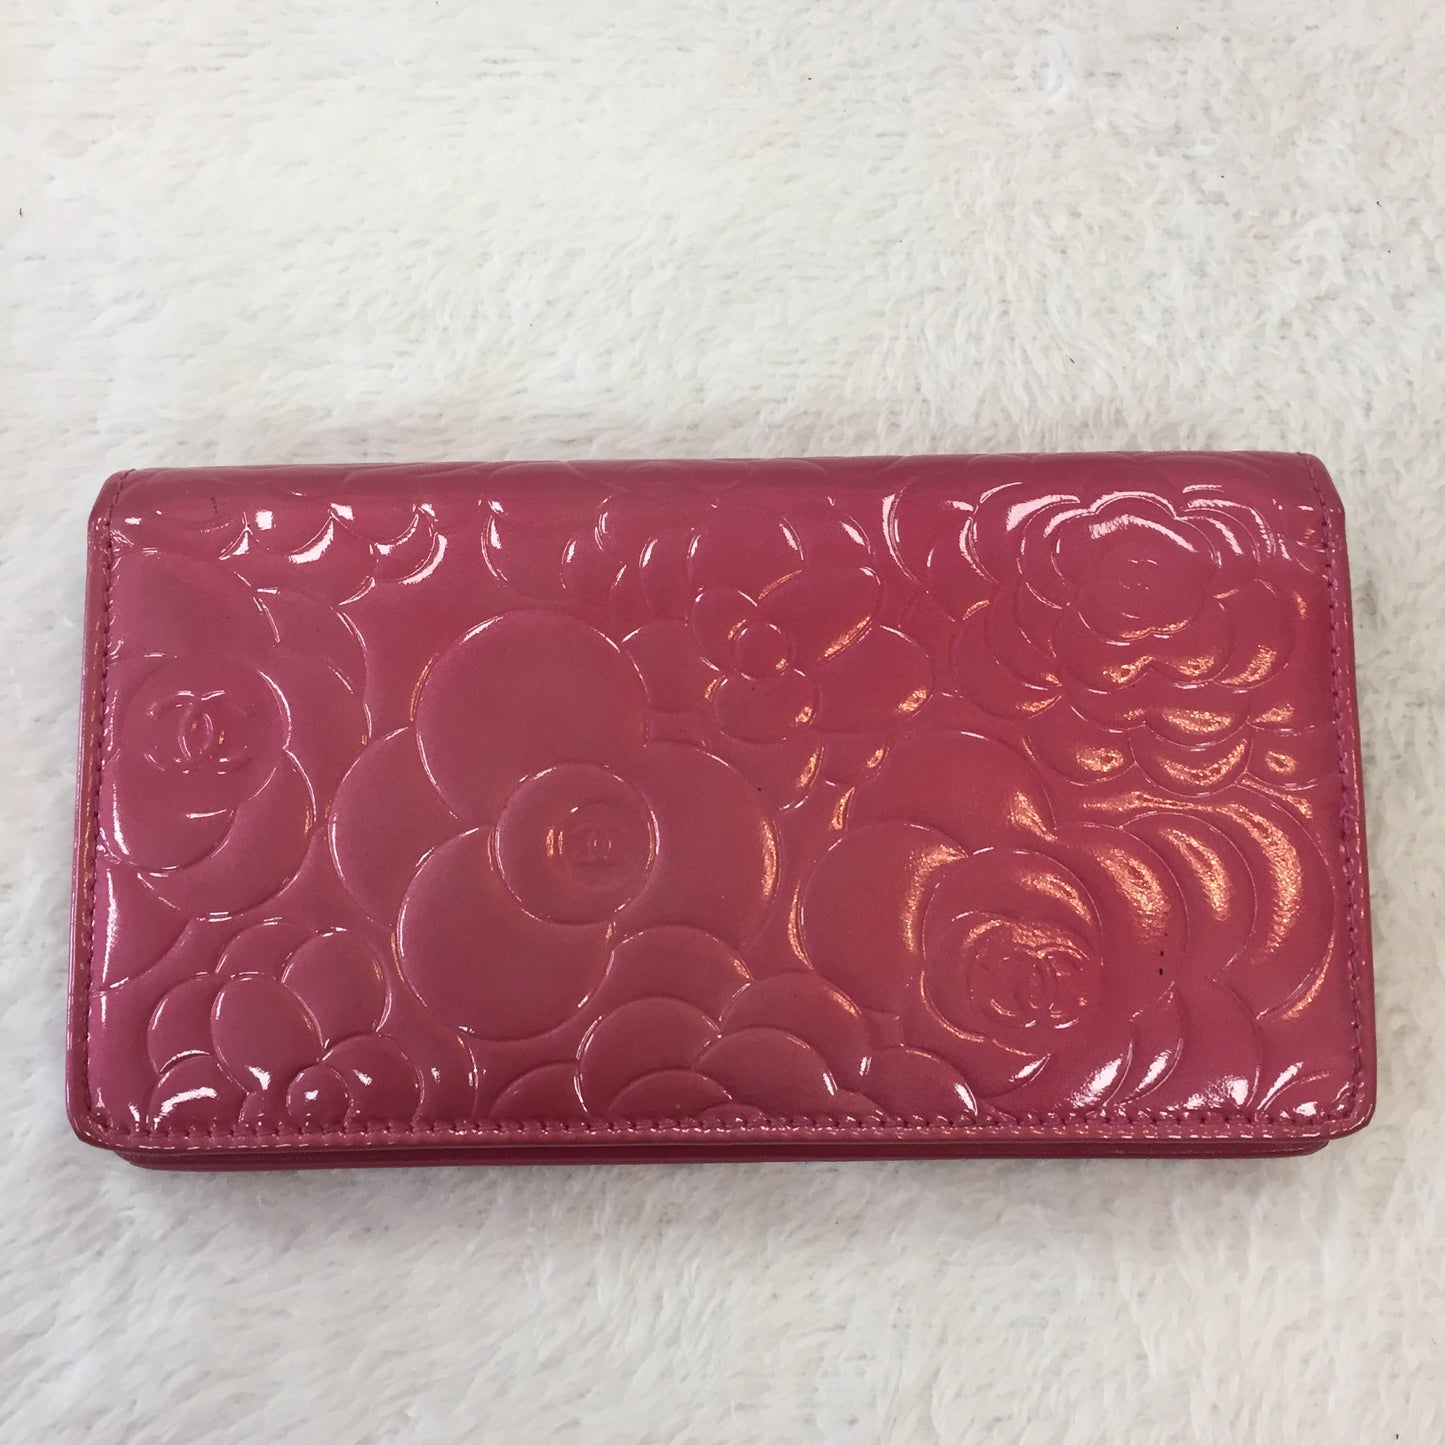 Authentic Chanel Rose Patent Camellia Wallet